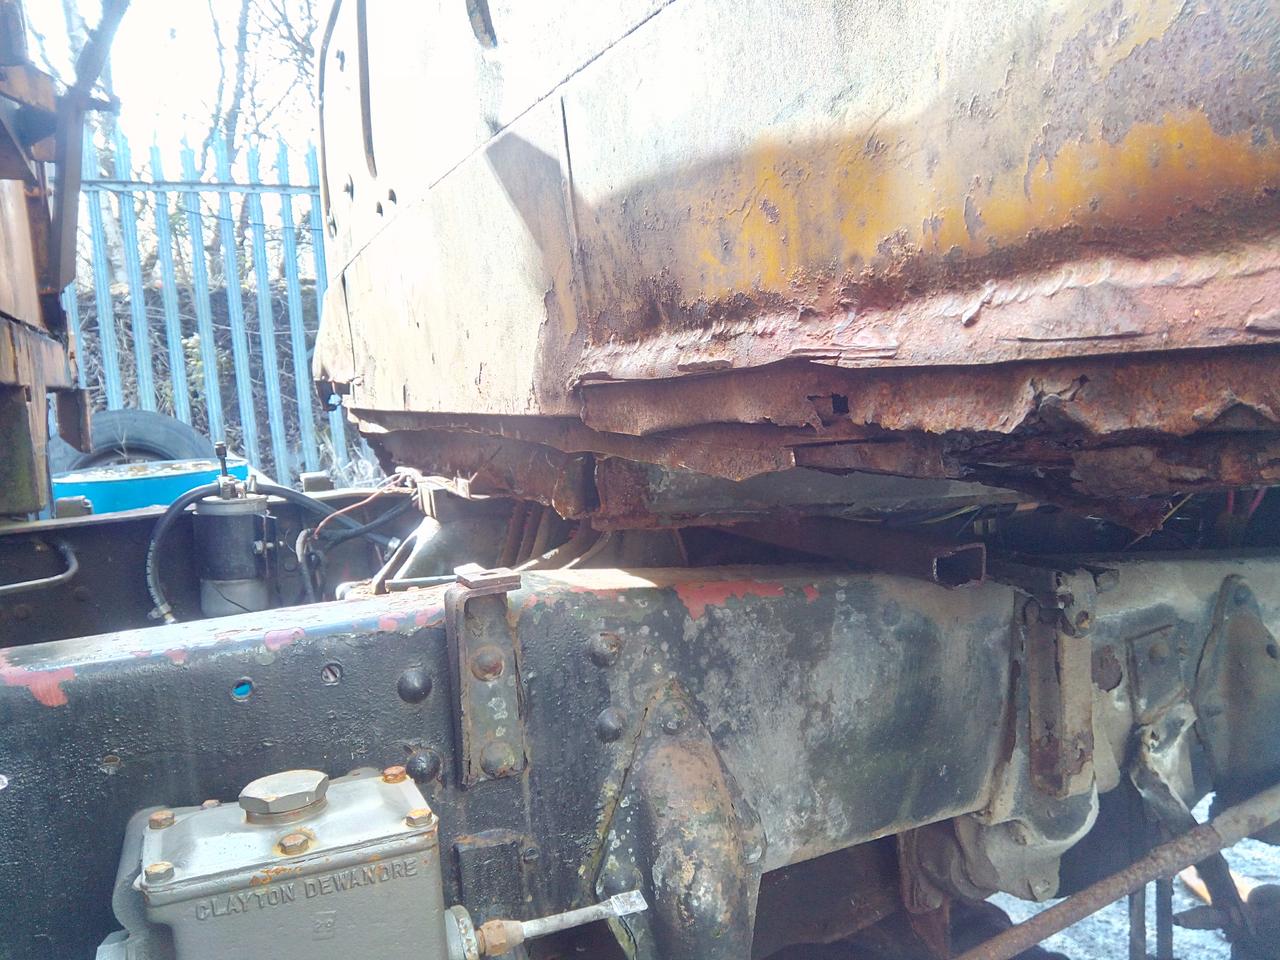 The back of the cab, showing multiple hacked off previous repairs
over rotten metal. It's a layer cake of rust and shit.